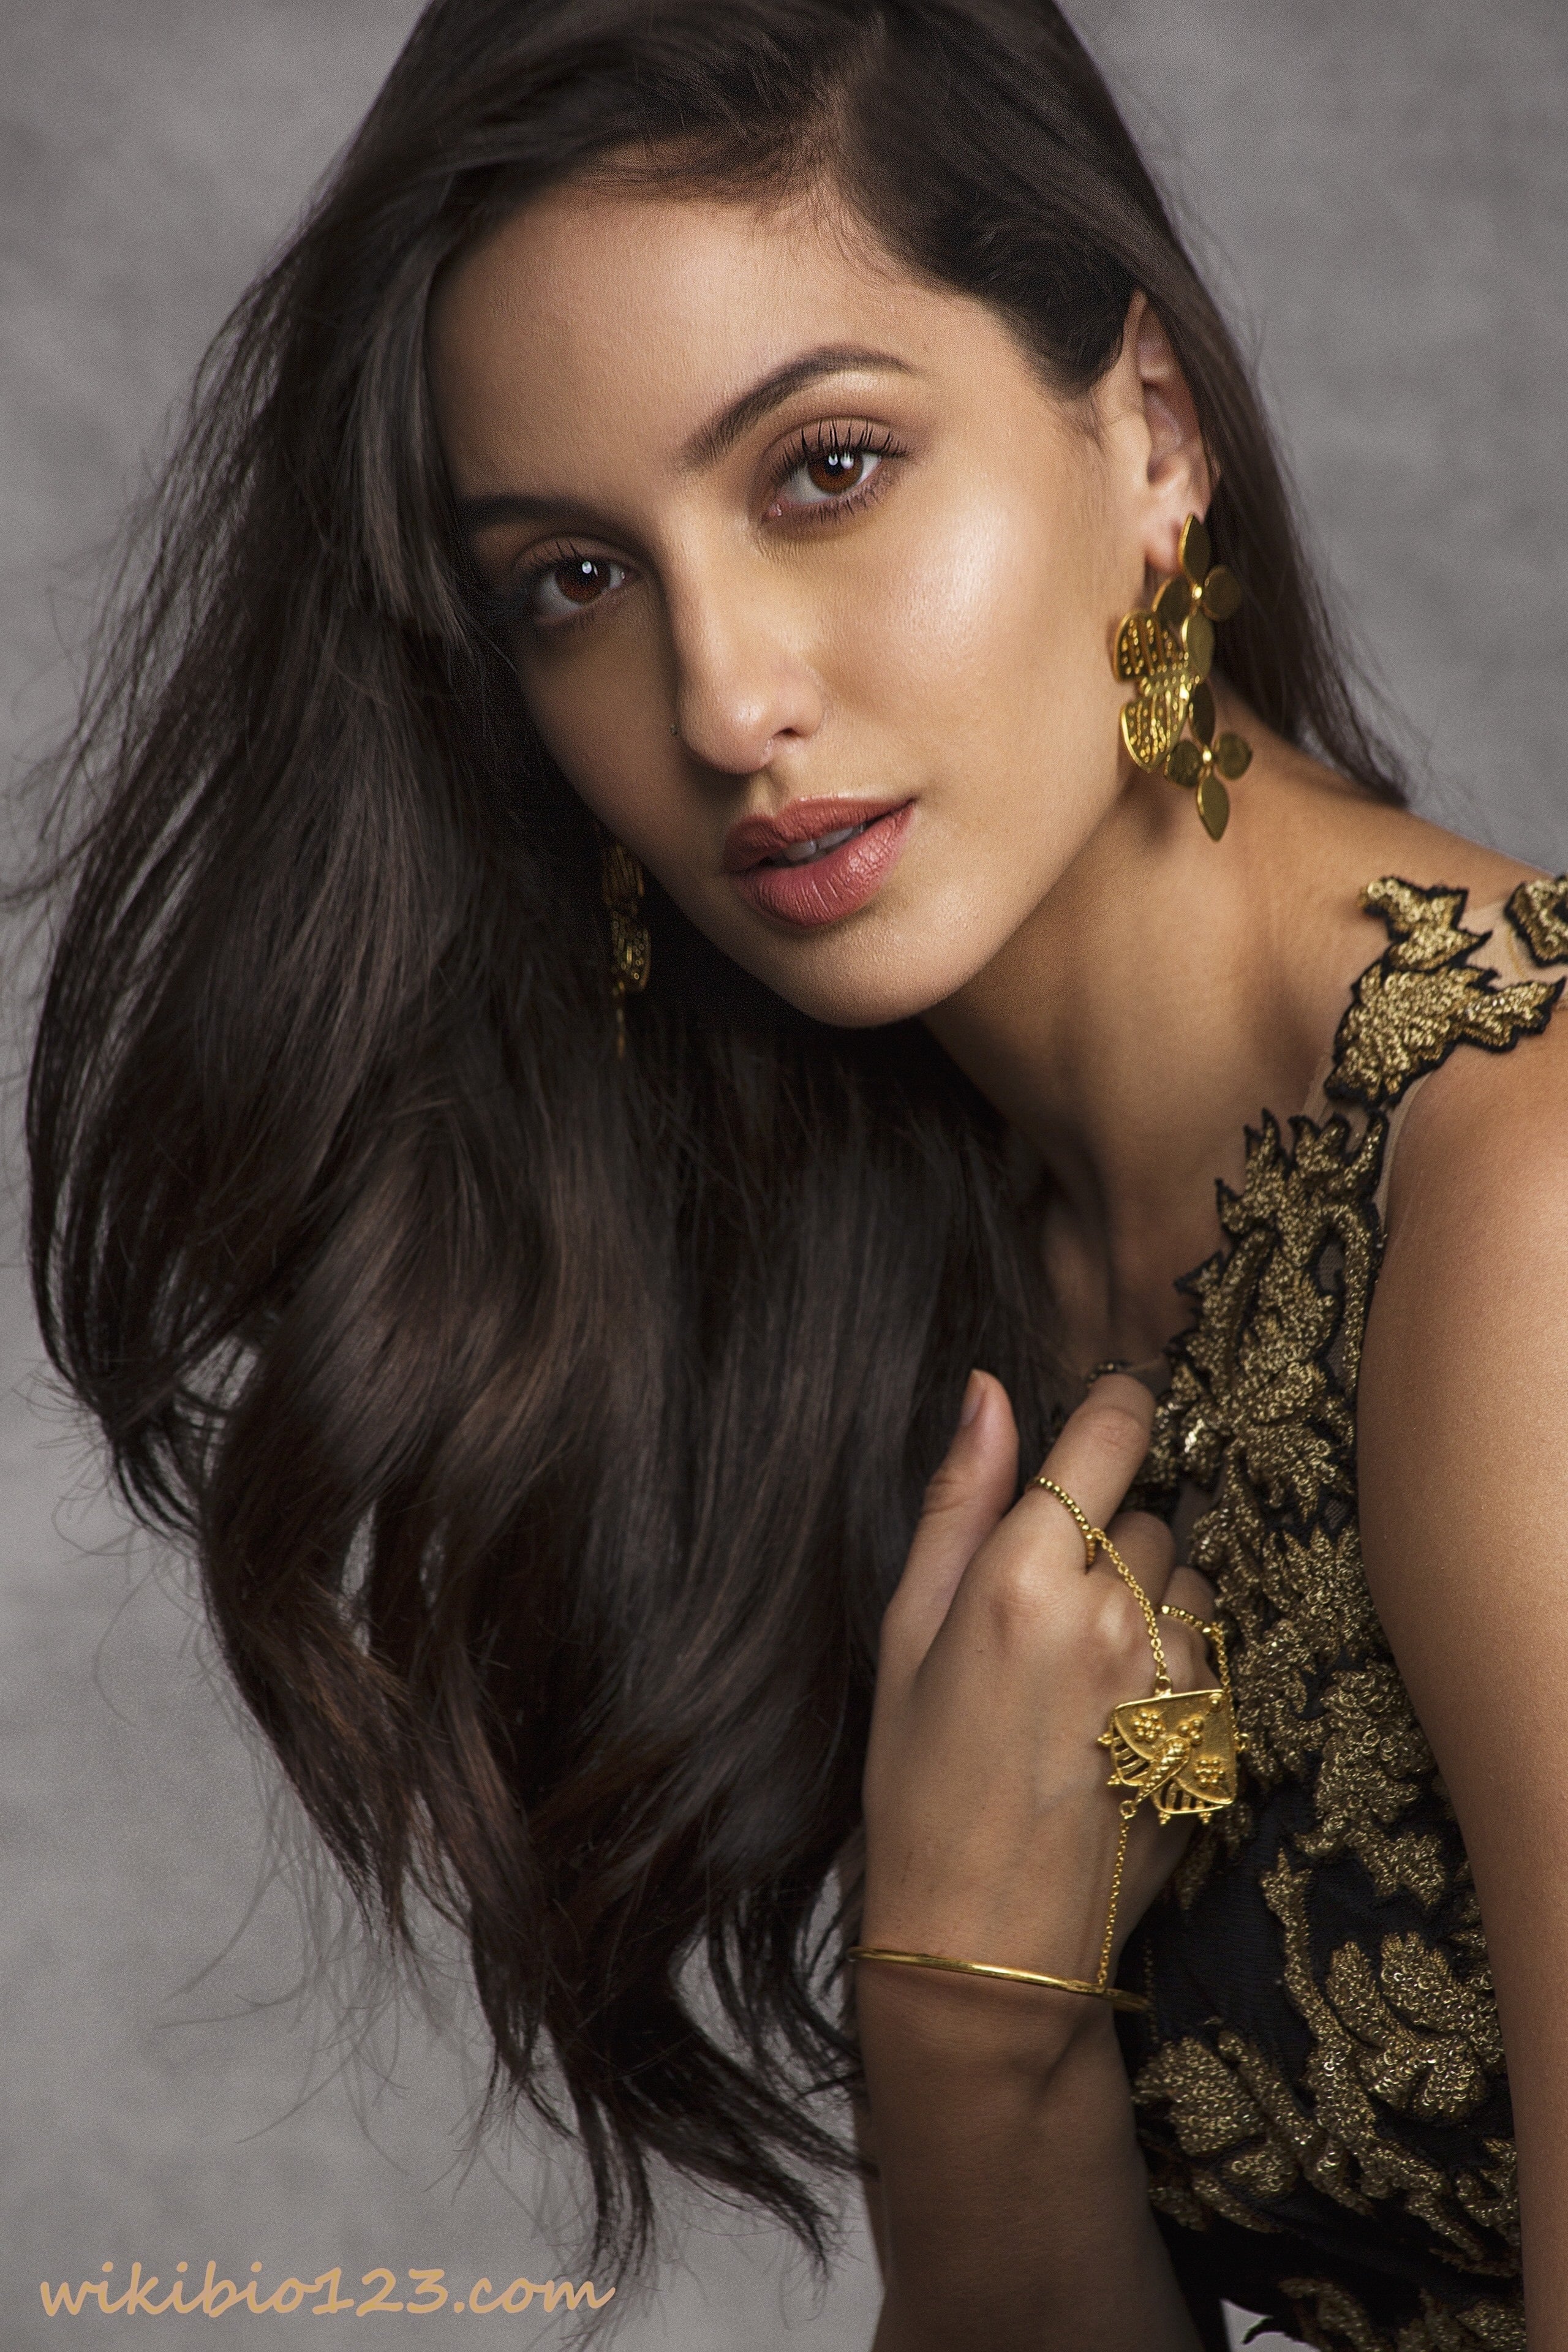 Nora Fatehi wiki Bio Age Figure size Height HD Images Wallpapers Download Hub of Wiki Bio of 